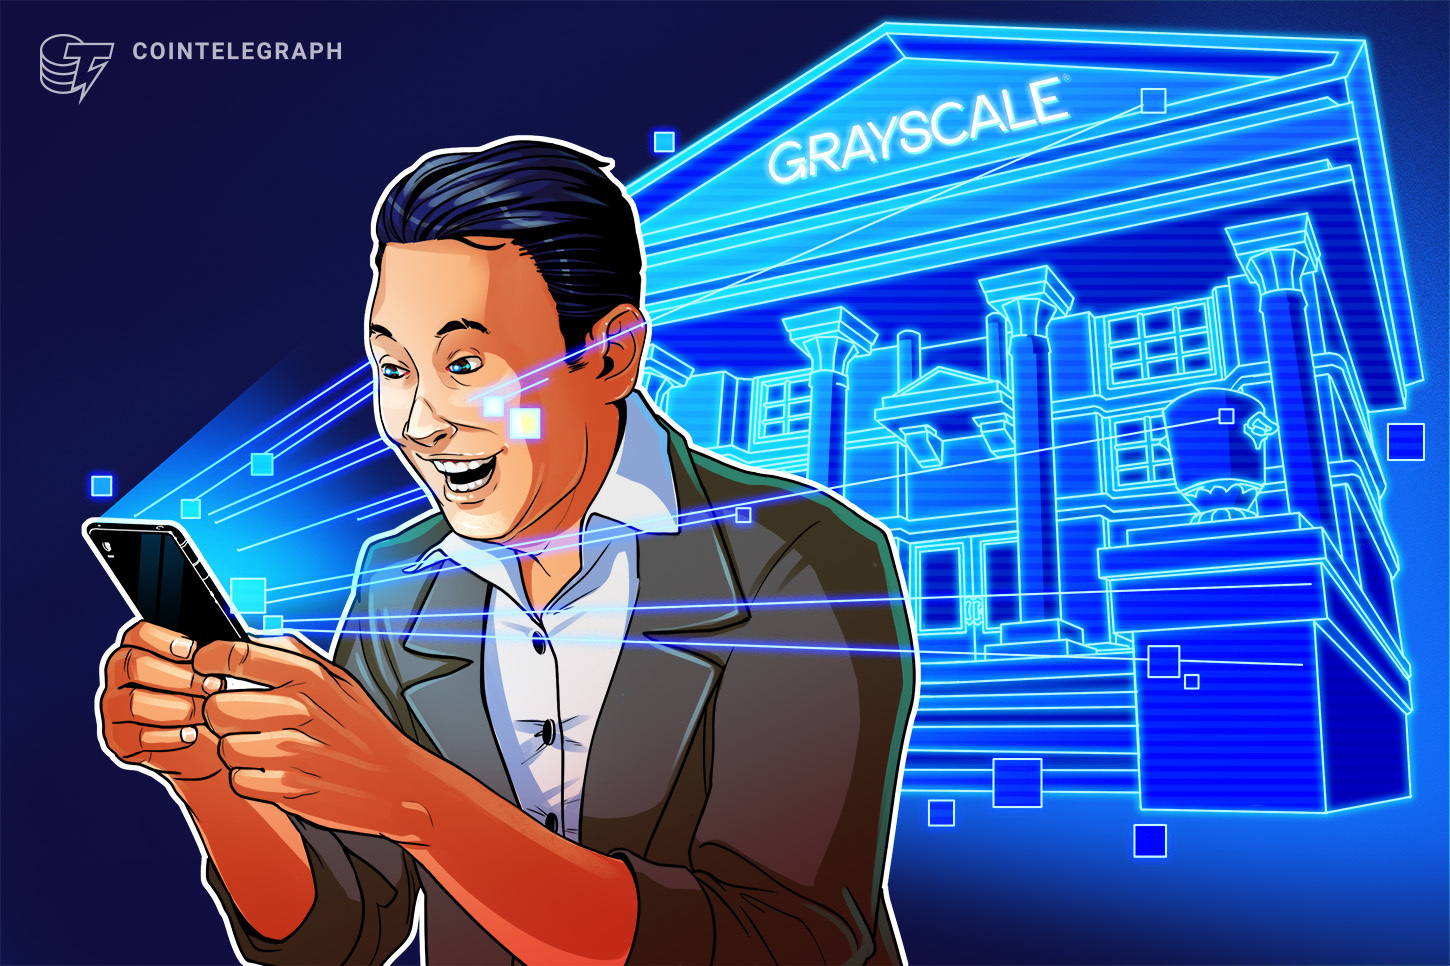 Grayscale launches new decentralized AI fund